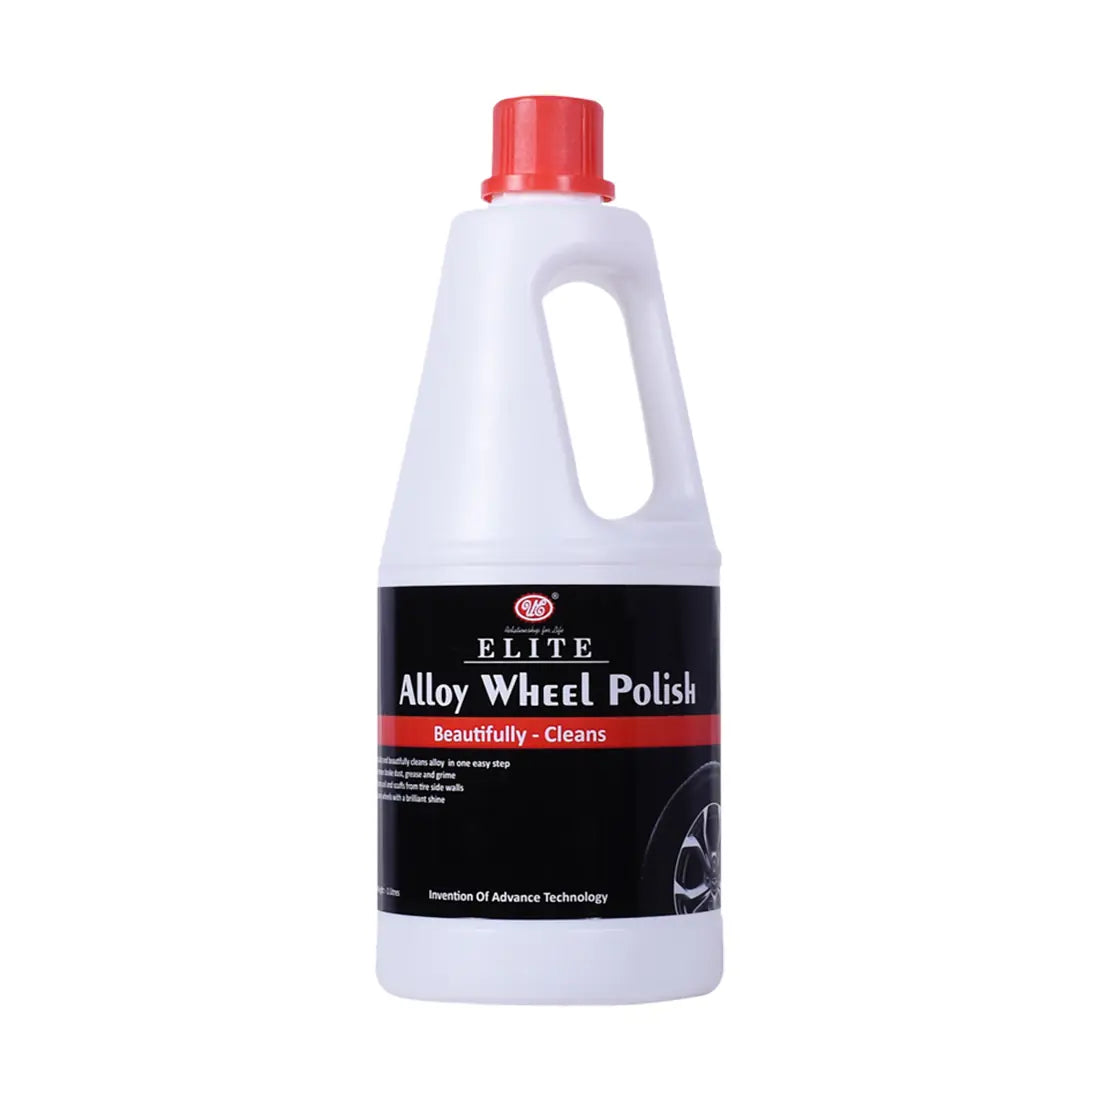 Ue Autotech Elite Alloy Wheel Polish 5l, Suitable For All Types Of Wheels, Increase Wheels Shine And Remove All Dust And Grime. at Rs 2699.00